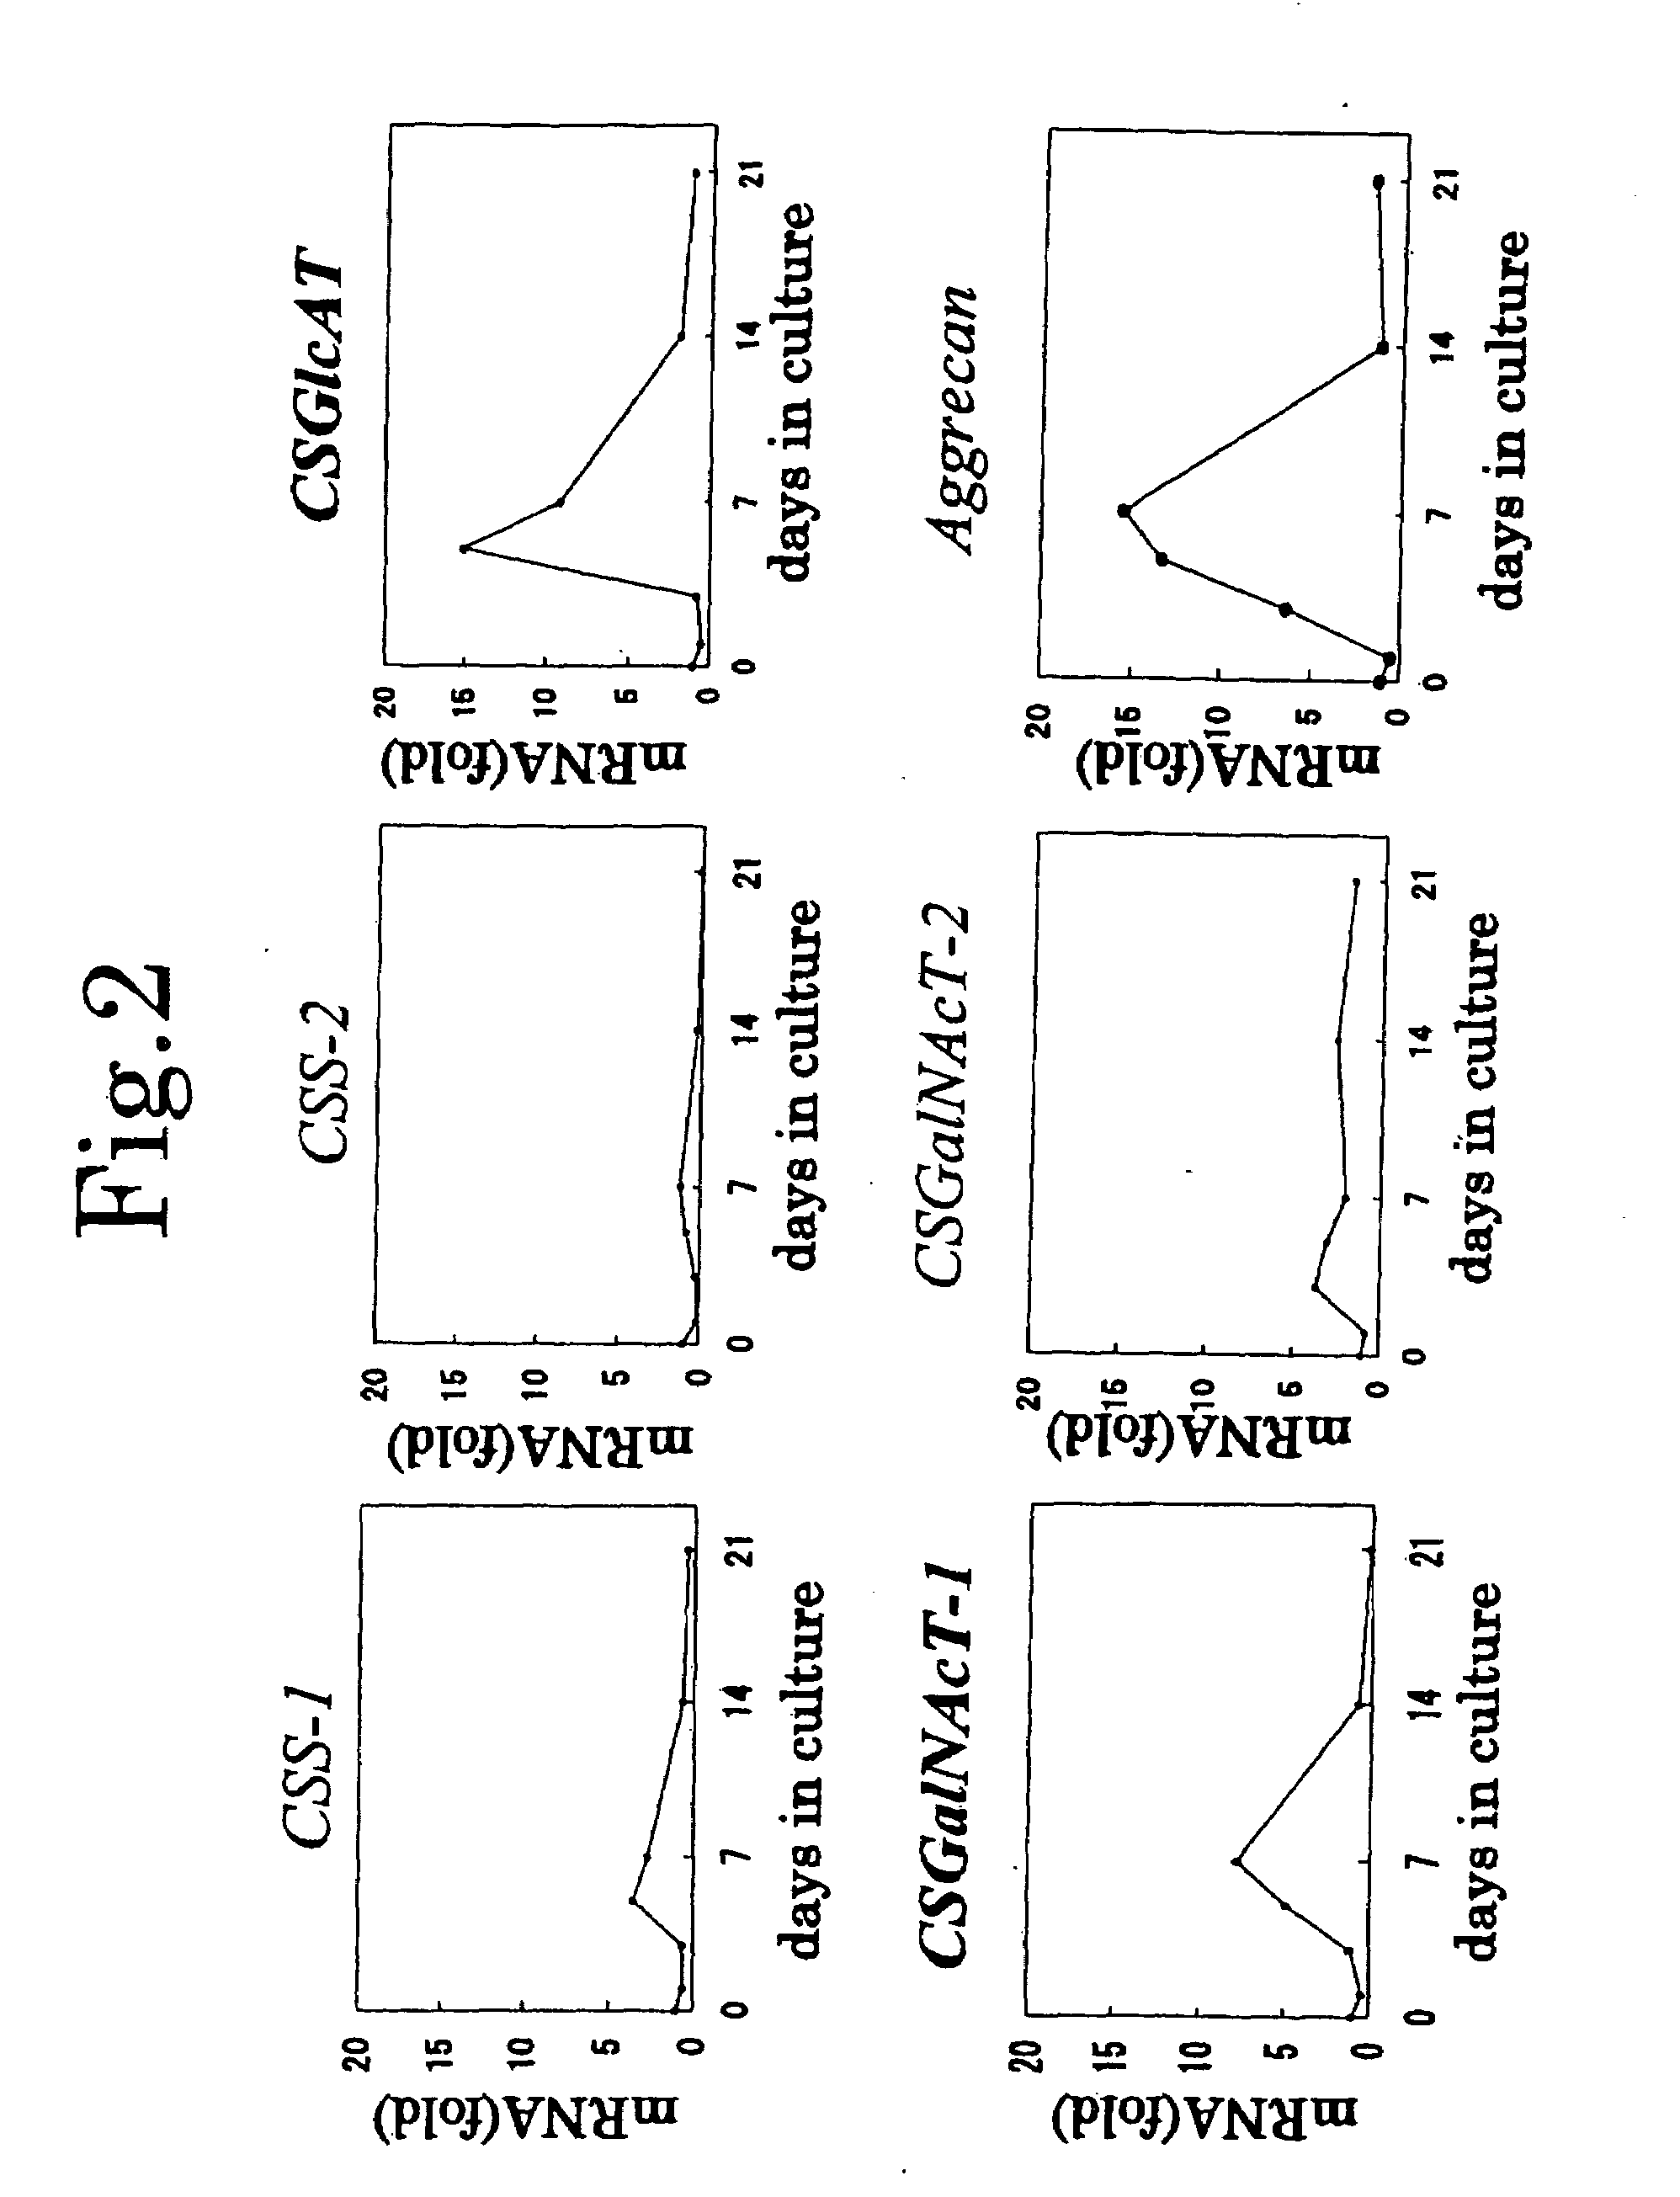 Chondroitin sulfate synthesis promoter